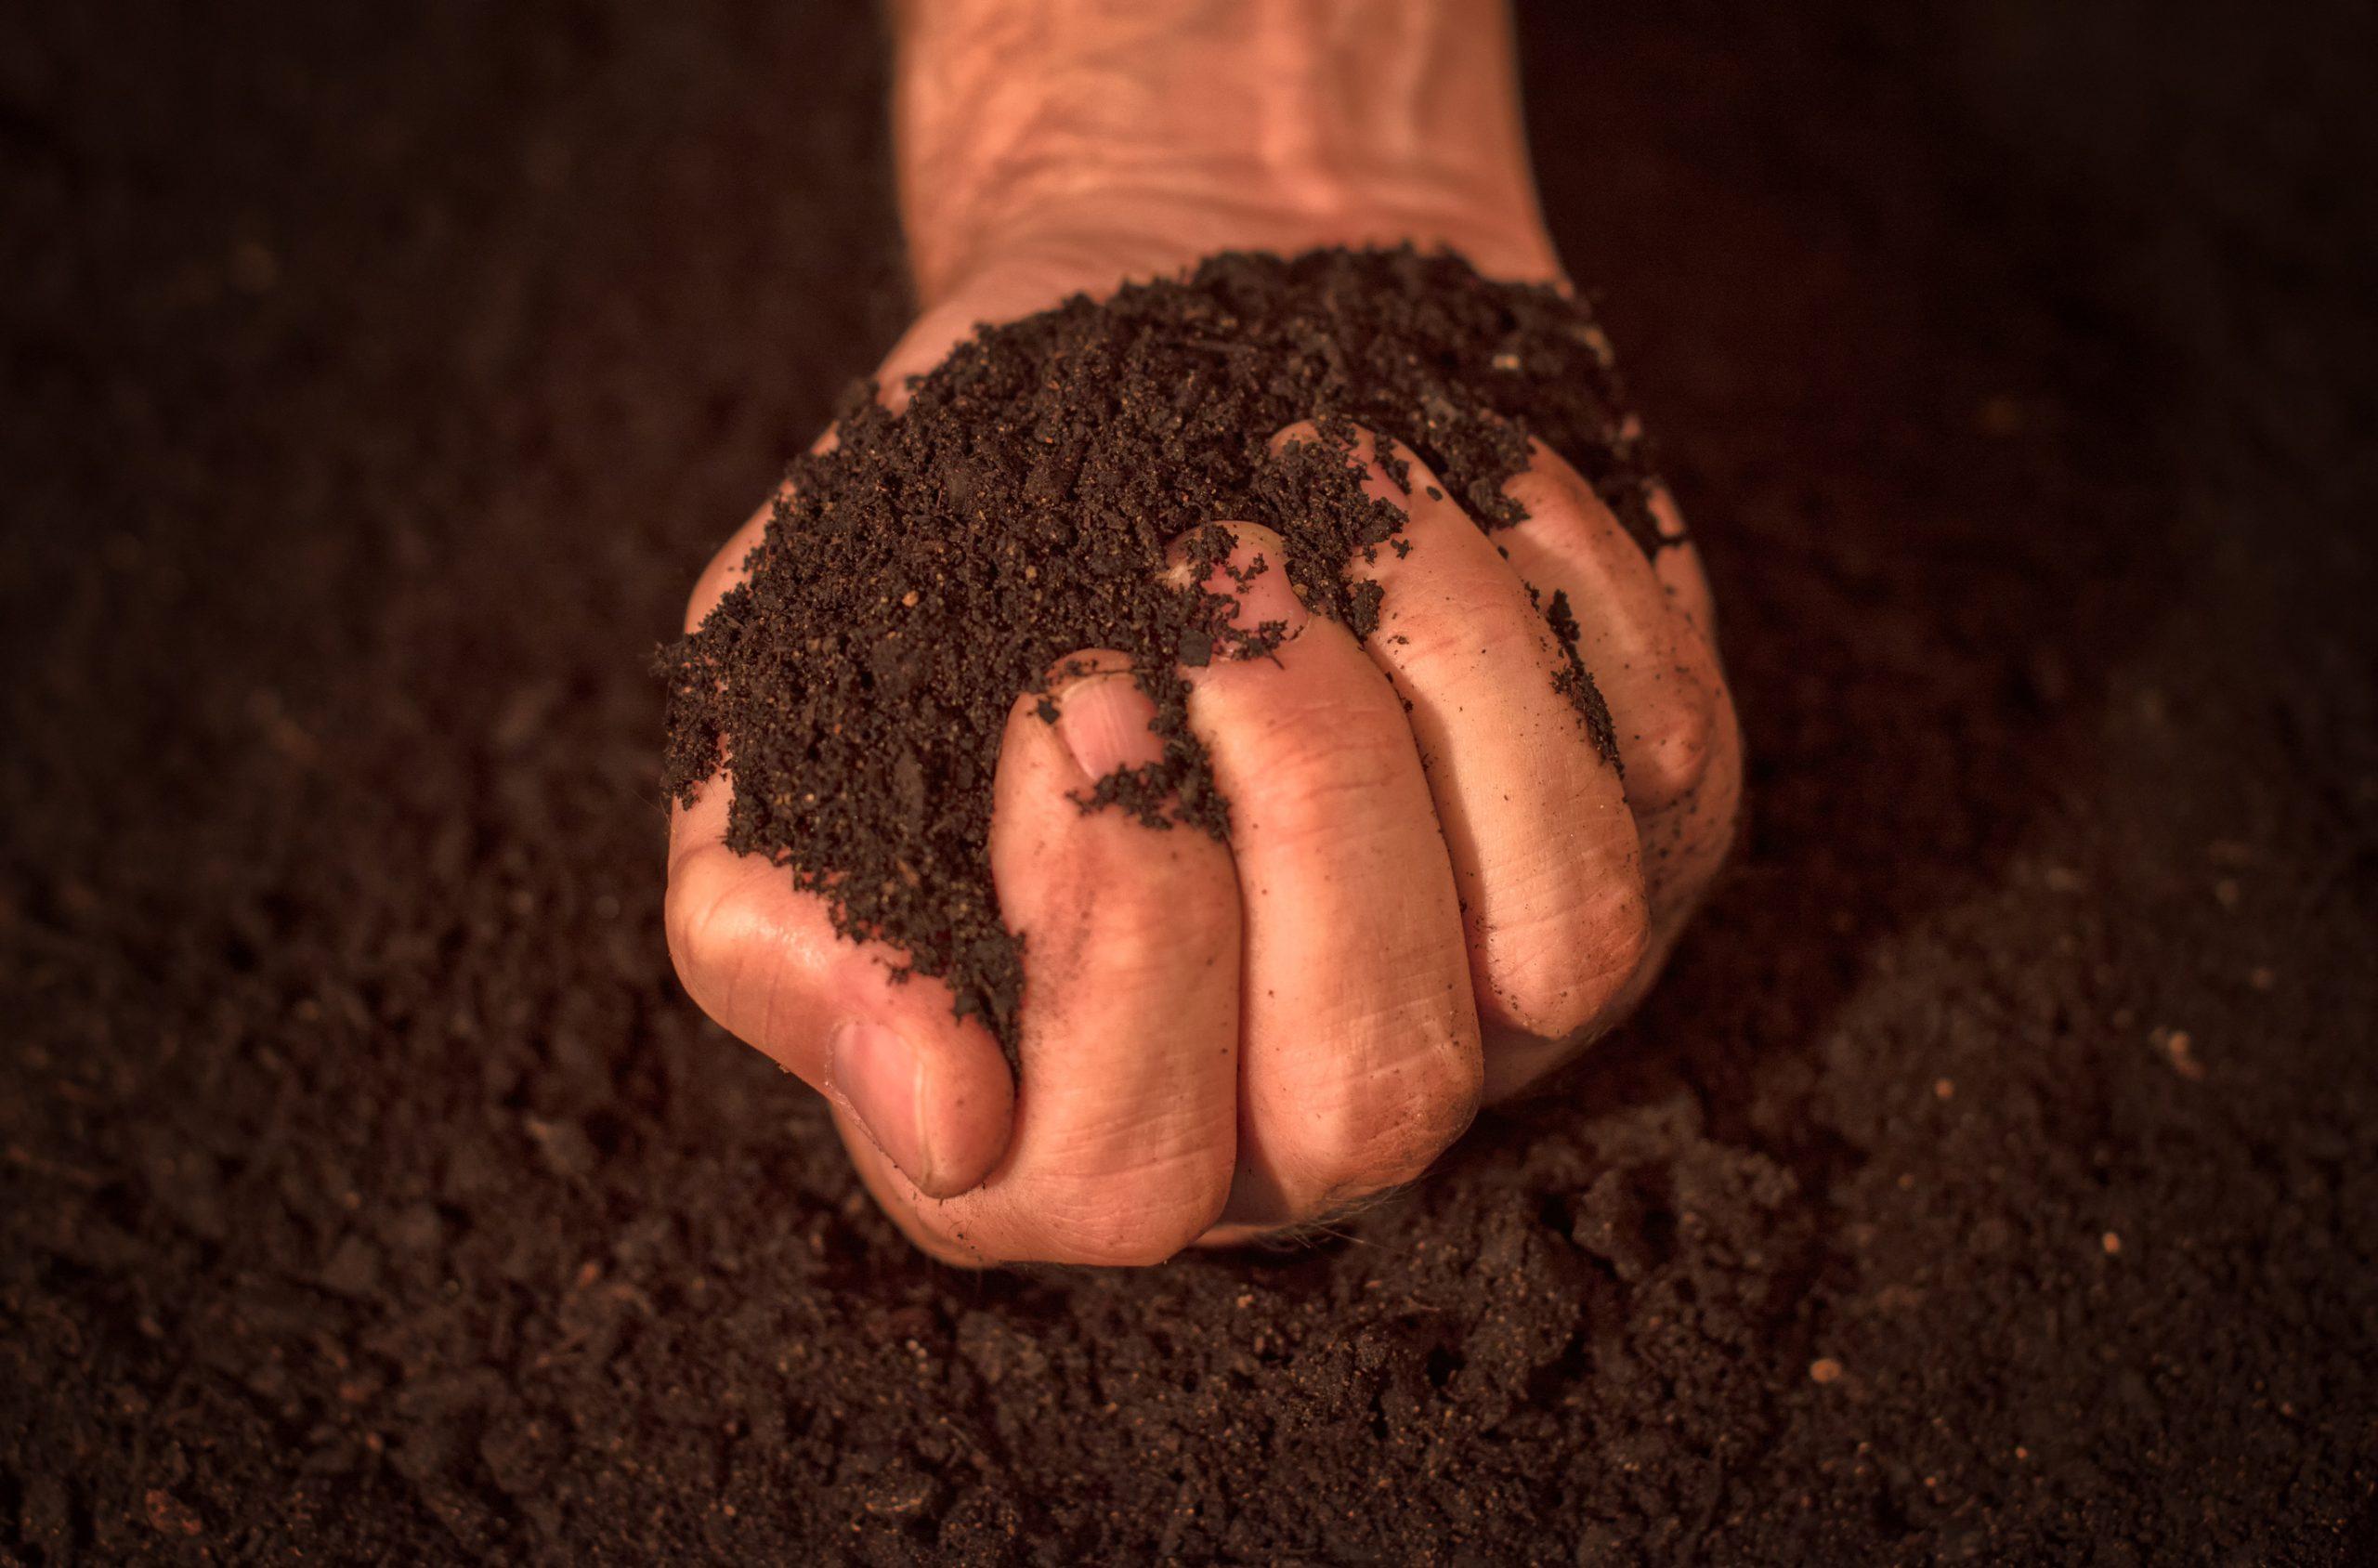 Quality soil in male gardener hands cultivated dirt ground for organic gardening and agriculture